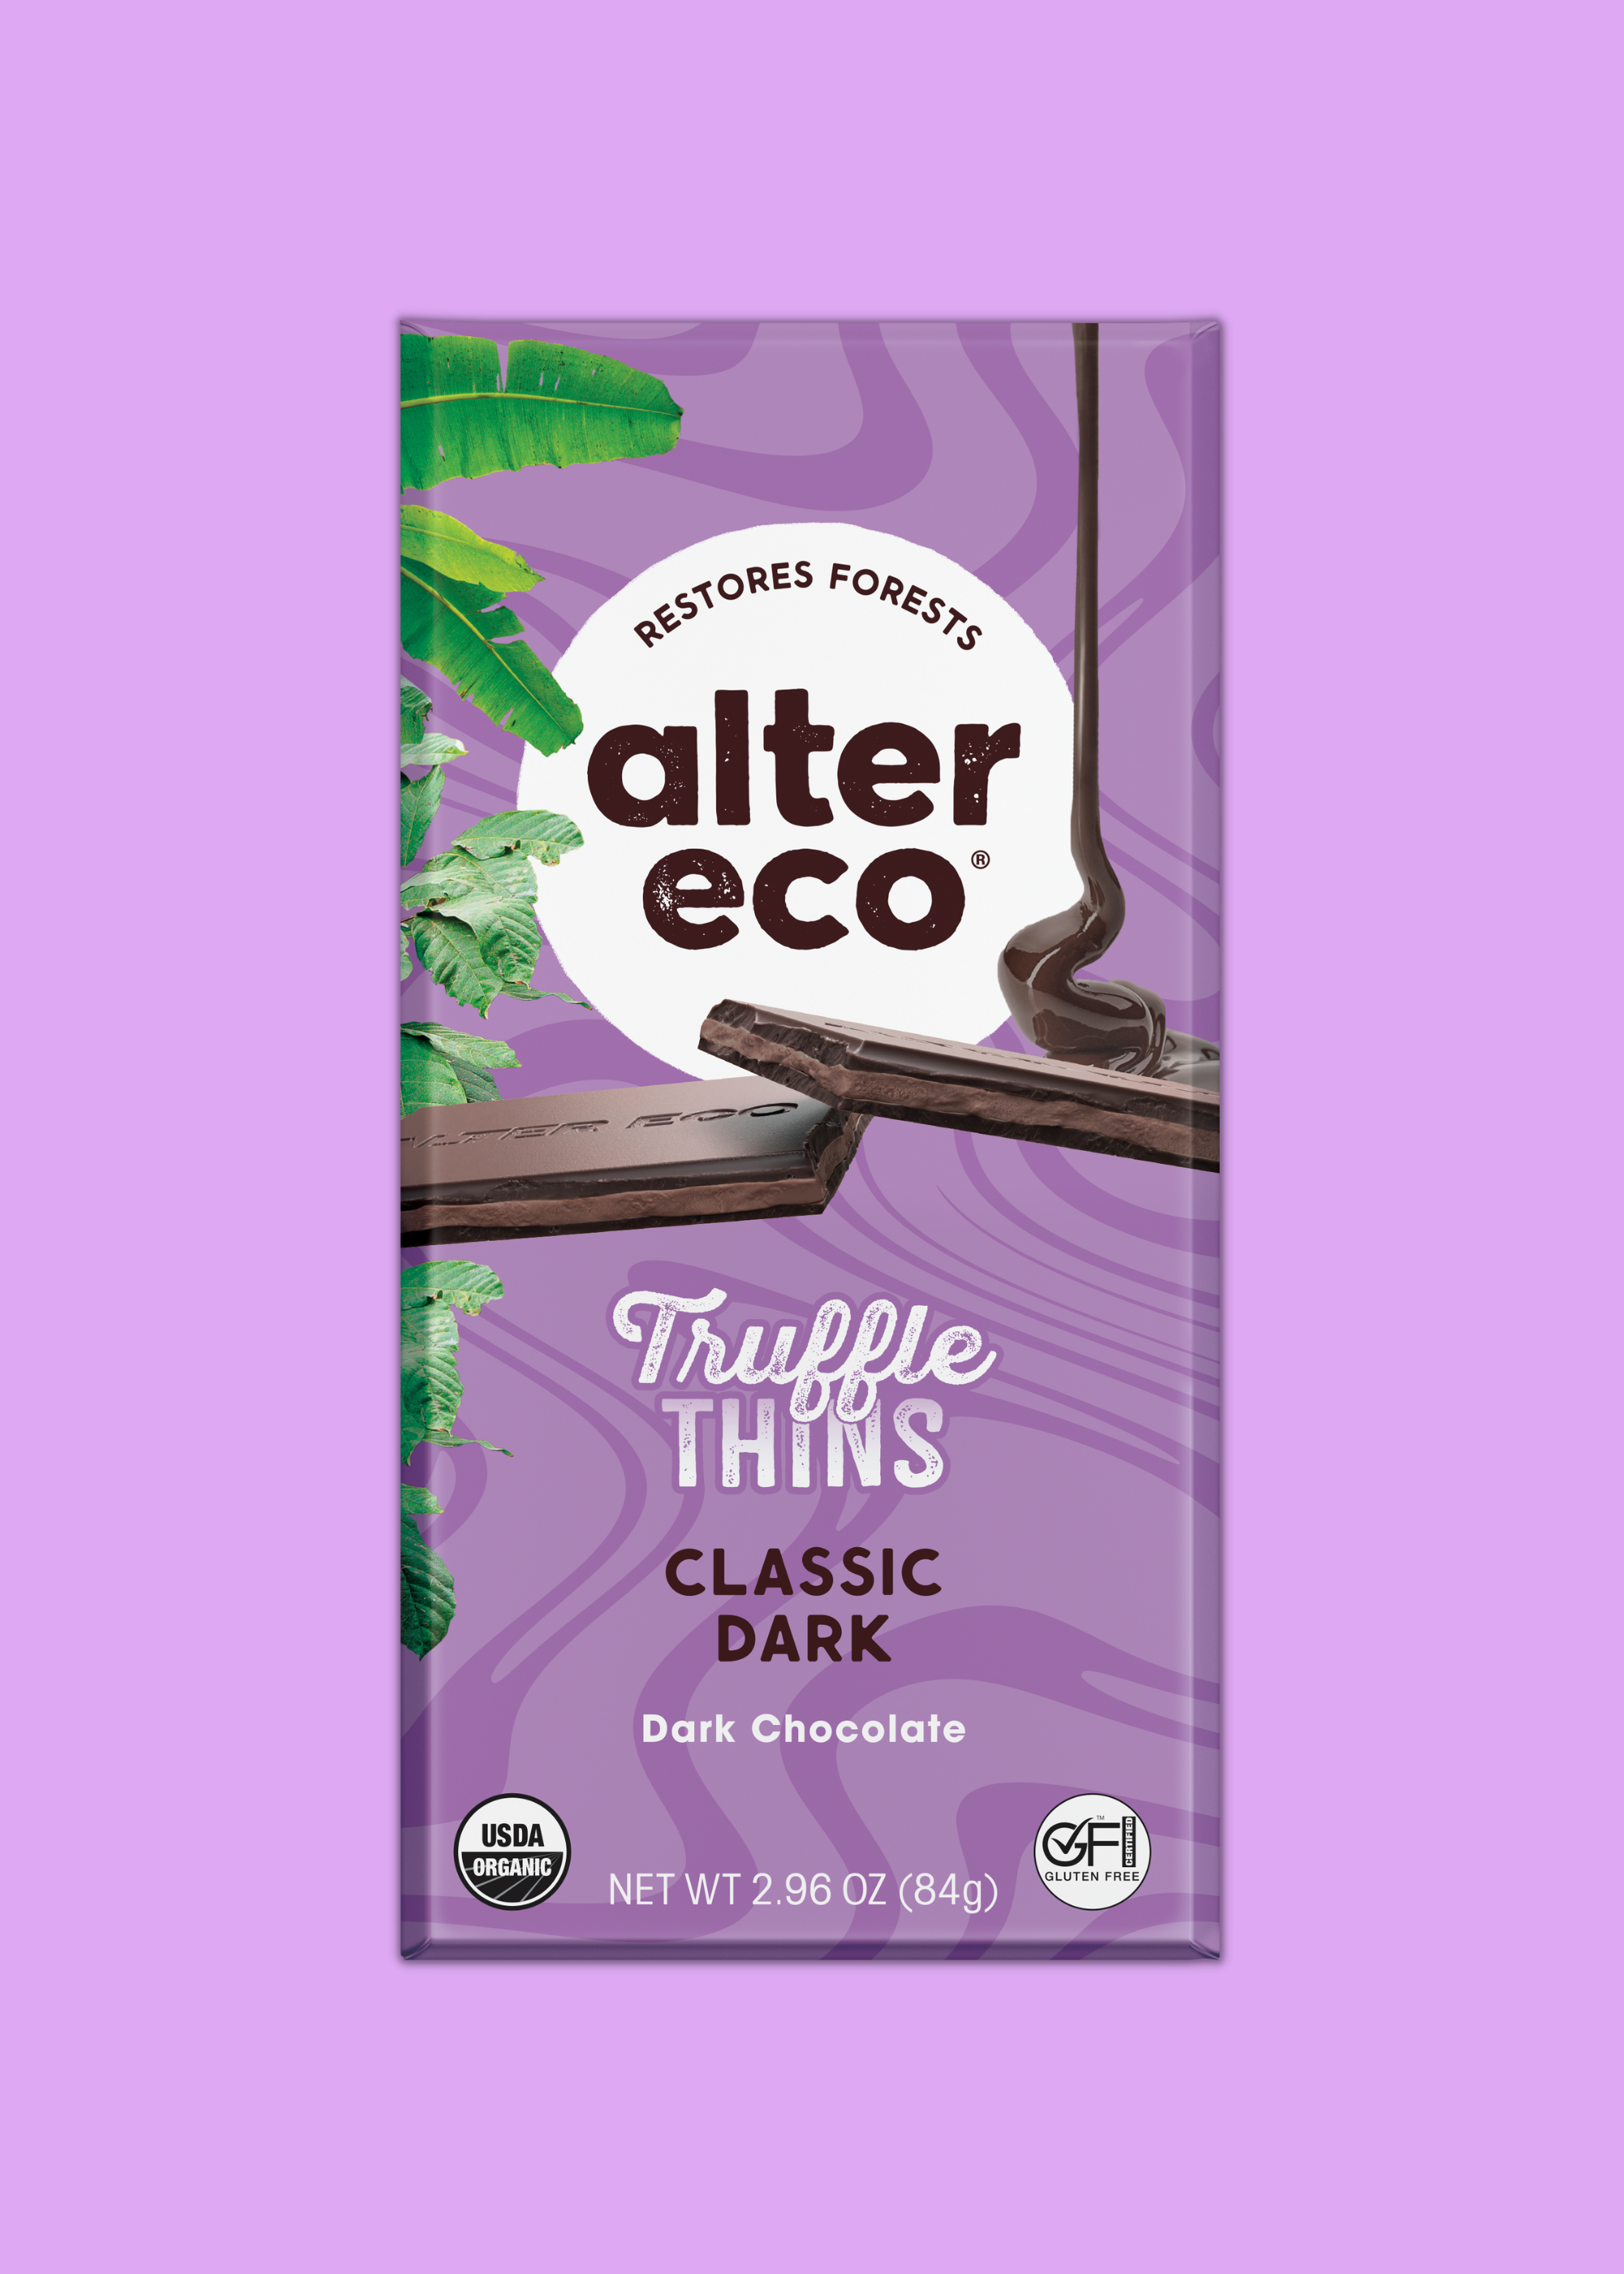 Alter Eco Creme Brulee Truffle Thins, Chocolate Bar with Gooey Ganache  Truffle Filling, Organic, Gluten & Soy-Free, Non-GMO Snacks, No Additives